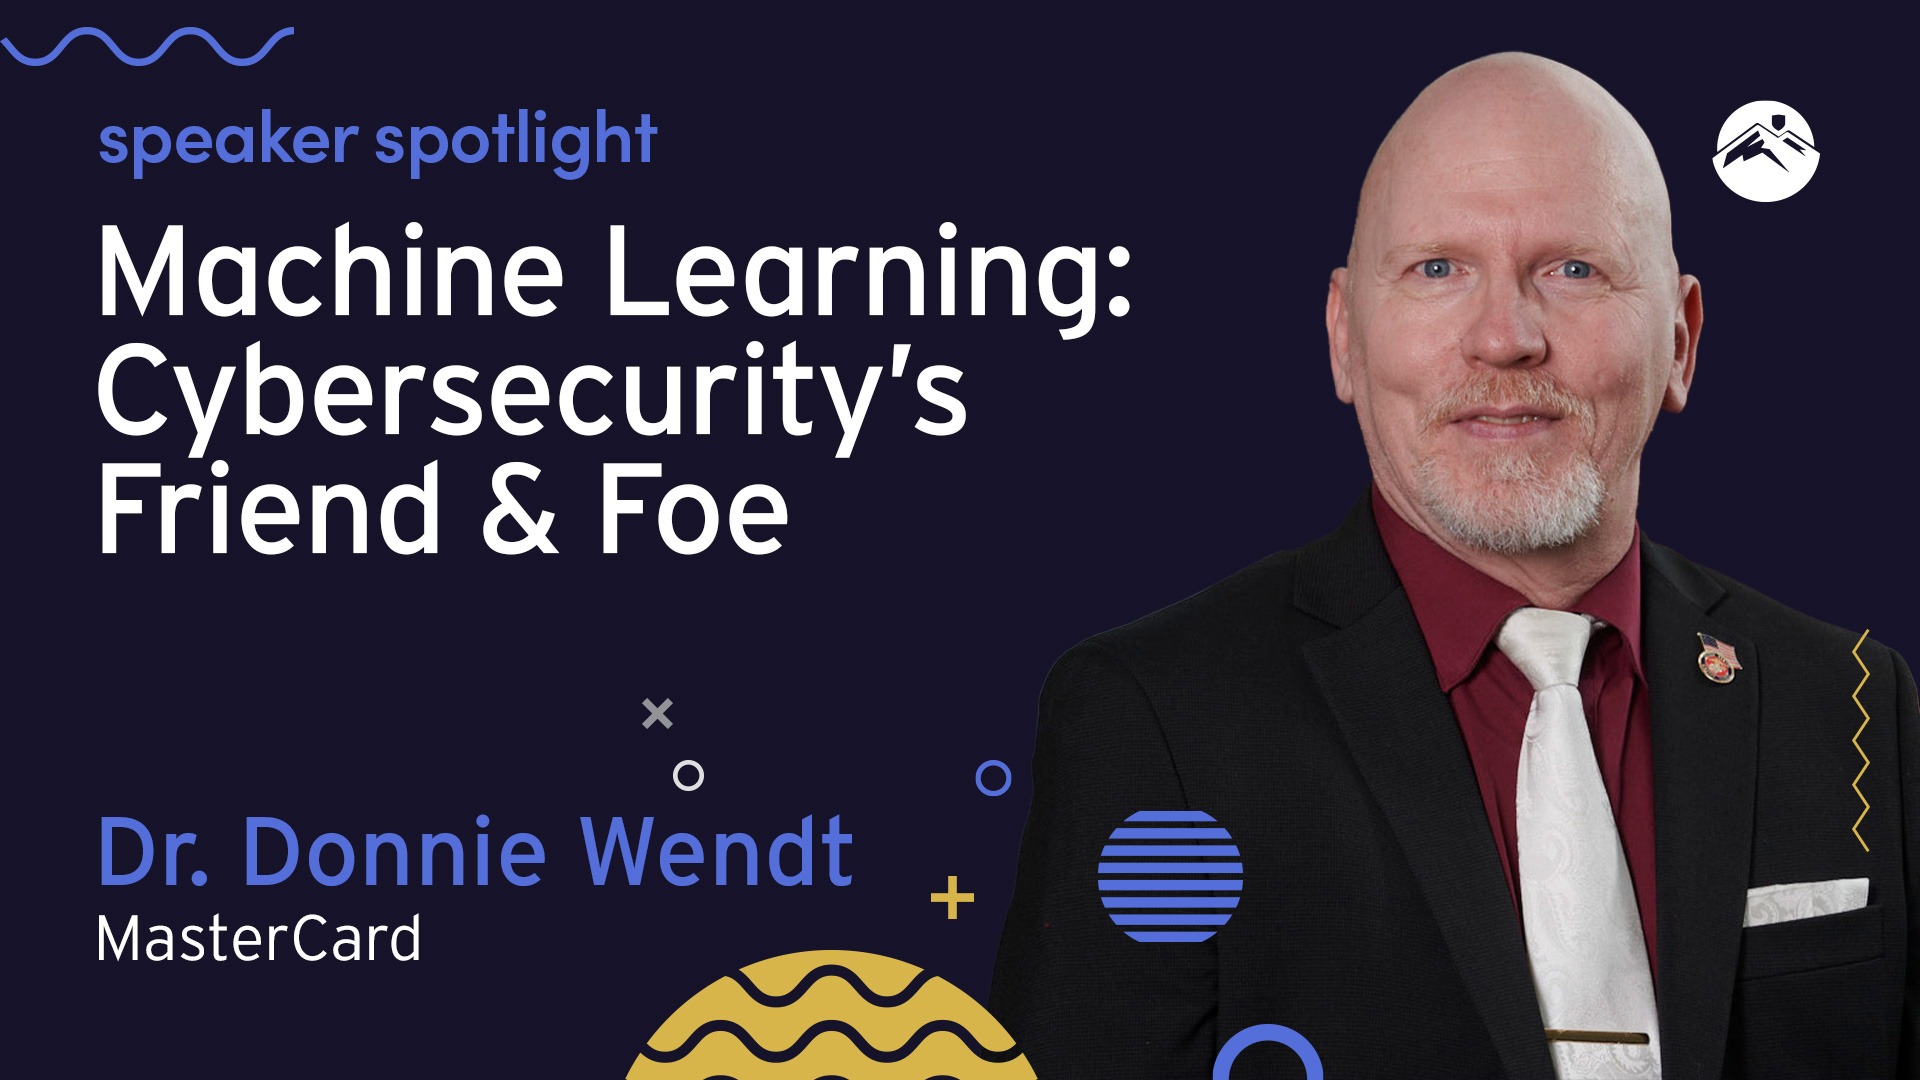 CSLS Speaker Spotlight: MasterCard's Donnie Wendt on Machine Learning in Cybersecurity